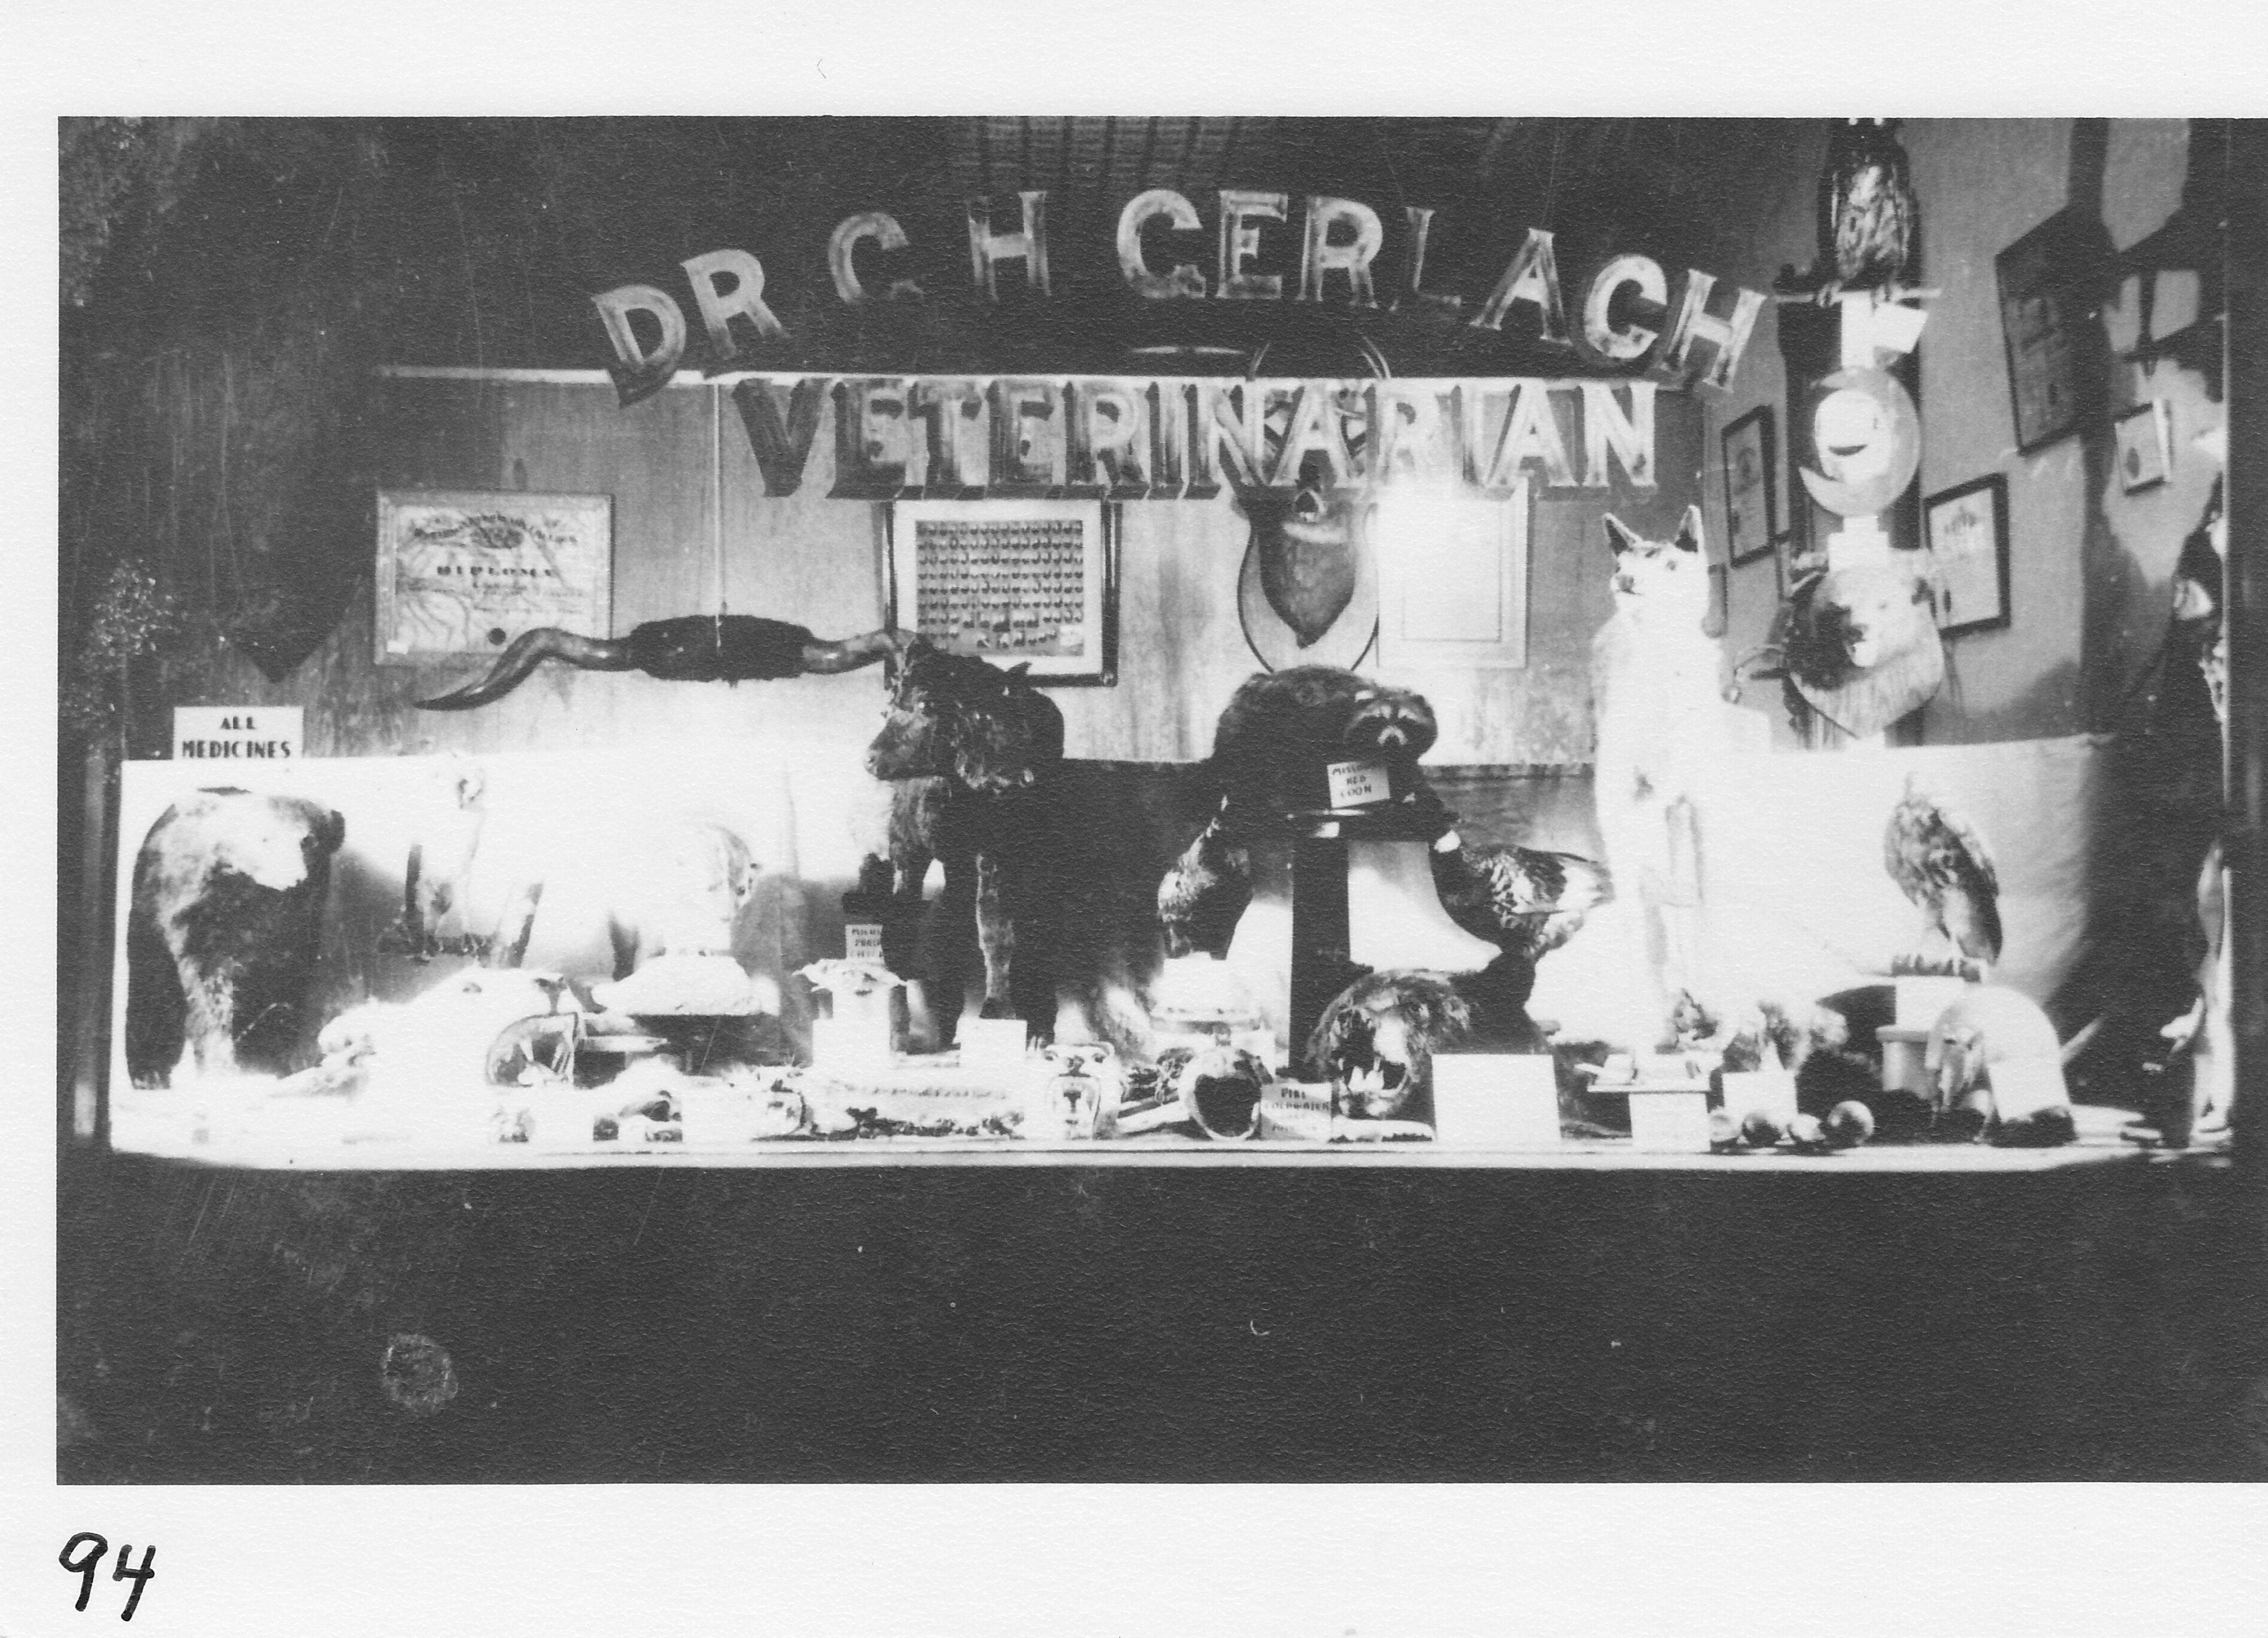 Dr. G. H. Gerlach’s veterinary offices, the west side of North Street (IOOF Building).  Window display. Later the Dunbar furniture and auction business.